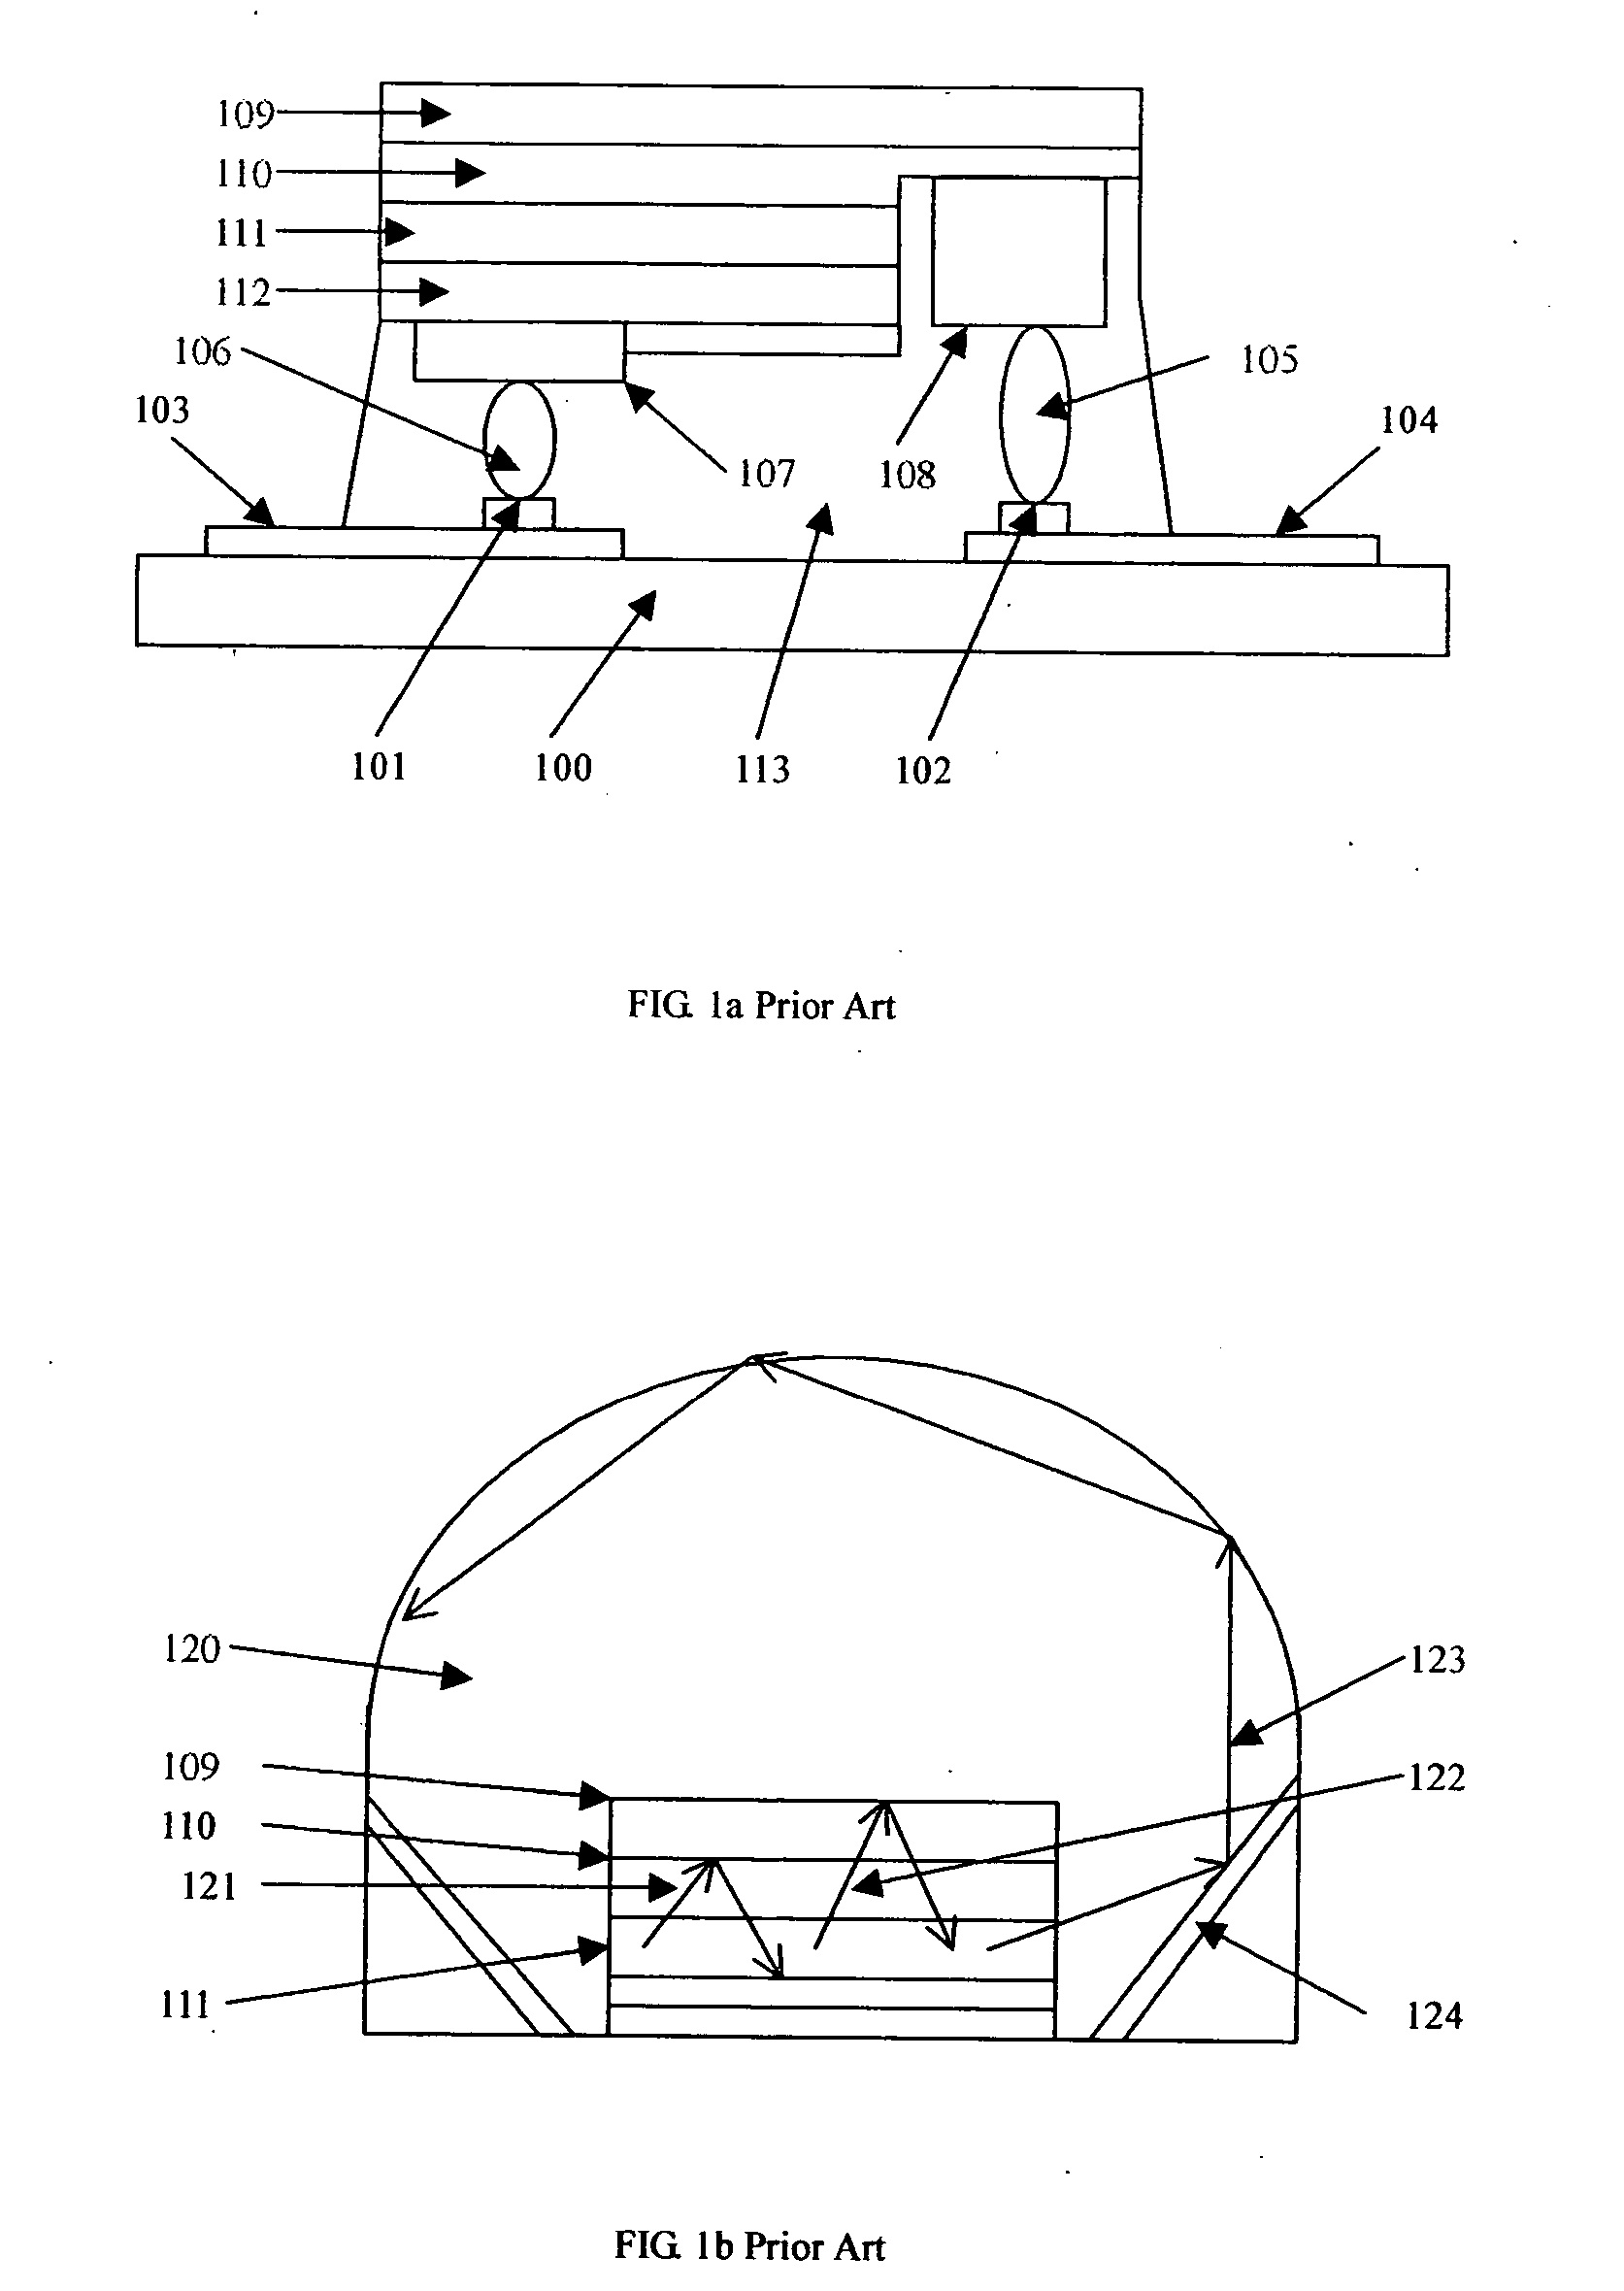 Flip chip assemblies and lamps of high power GaN LEDs, wafer level flip chip package process, and method of fabricating the same